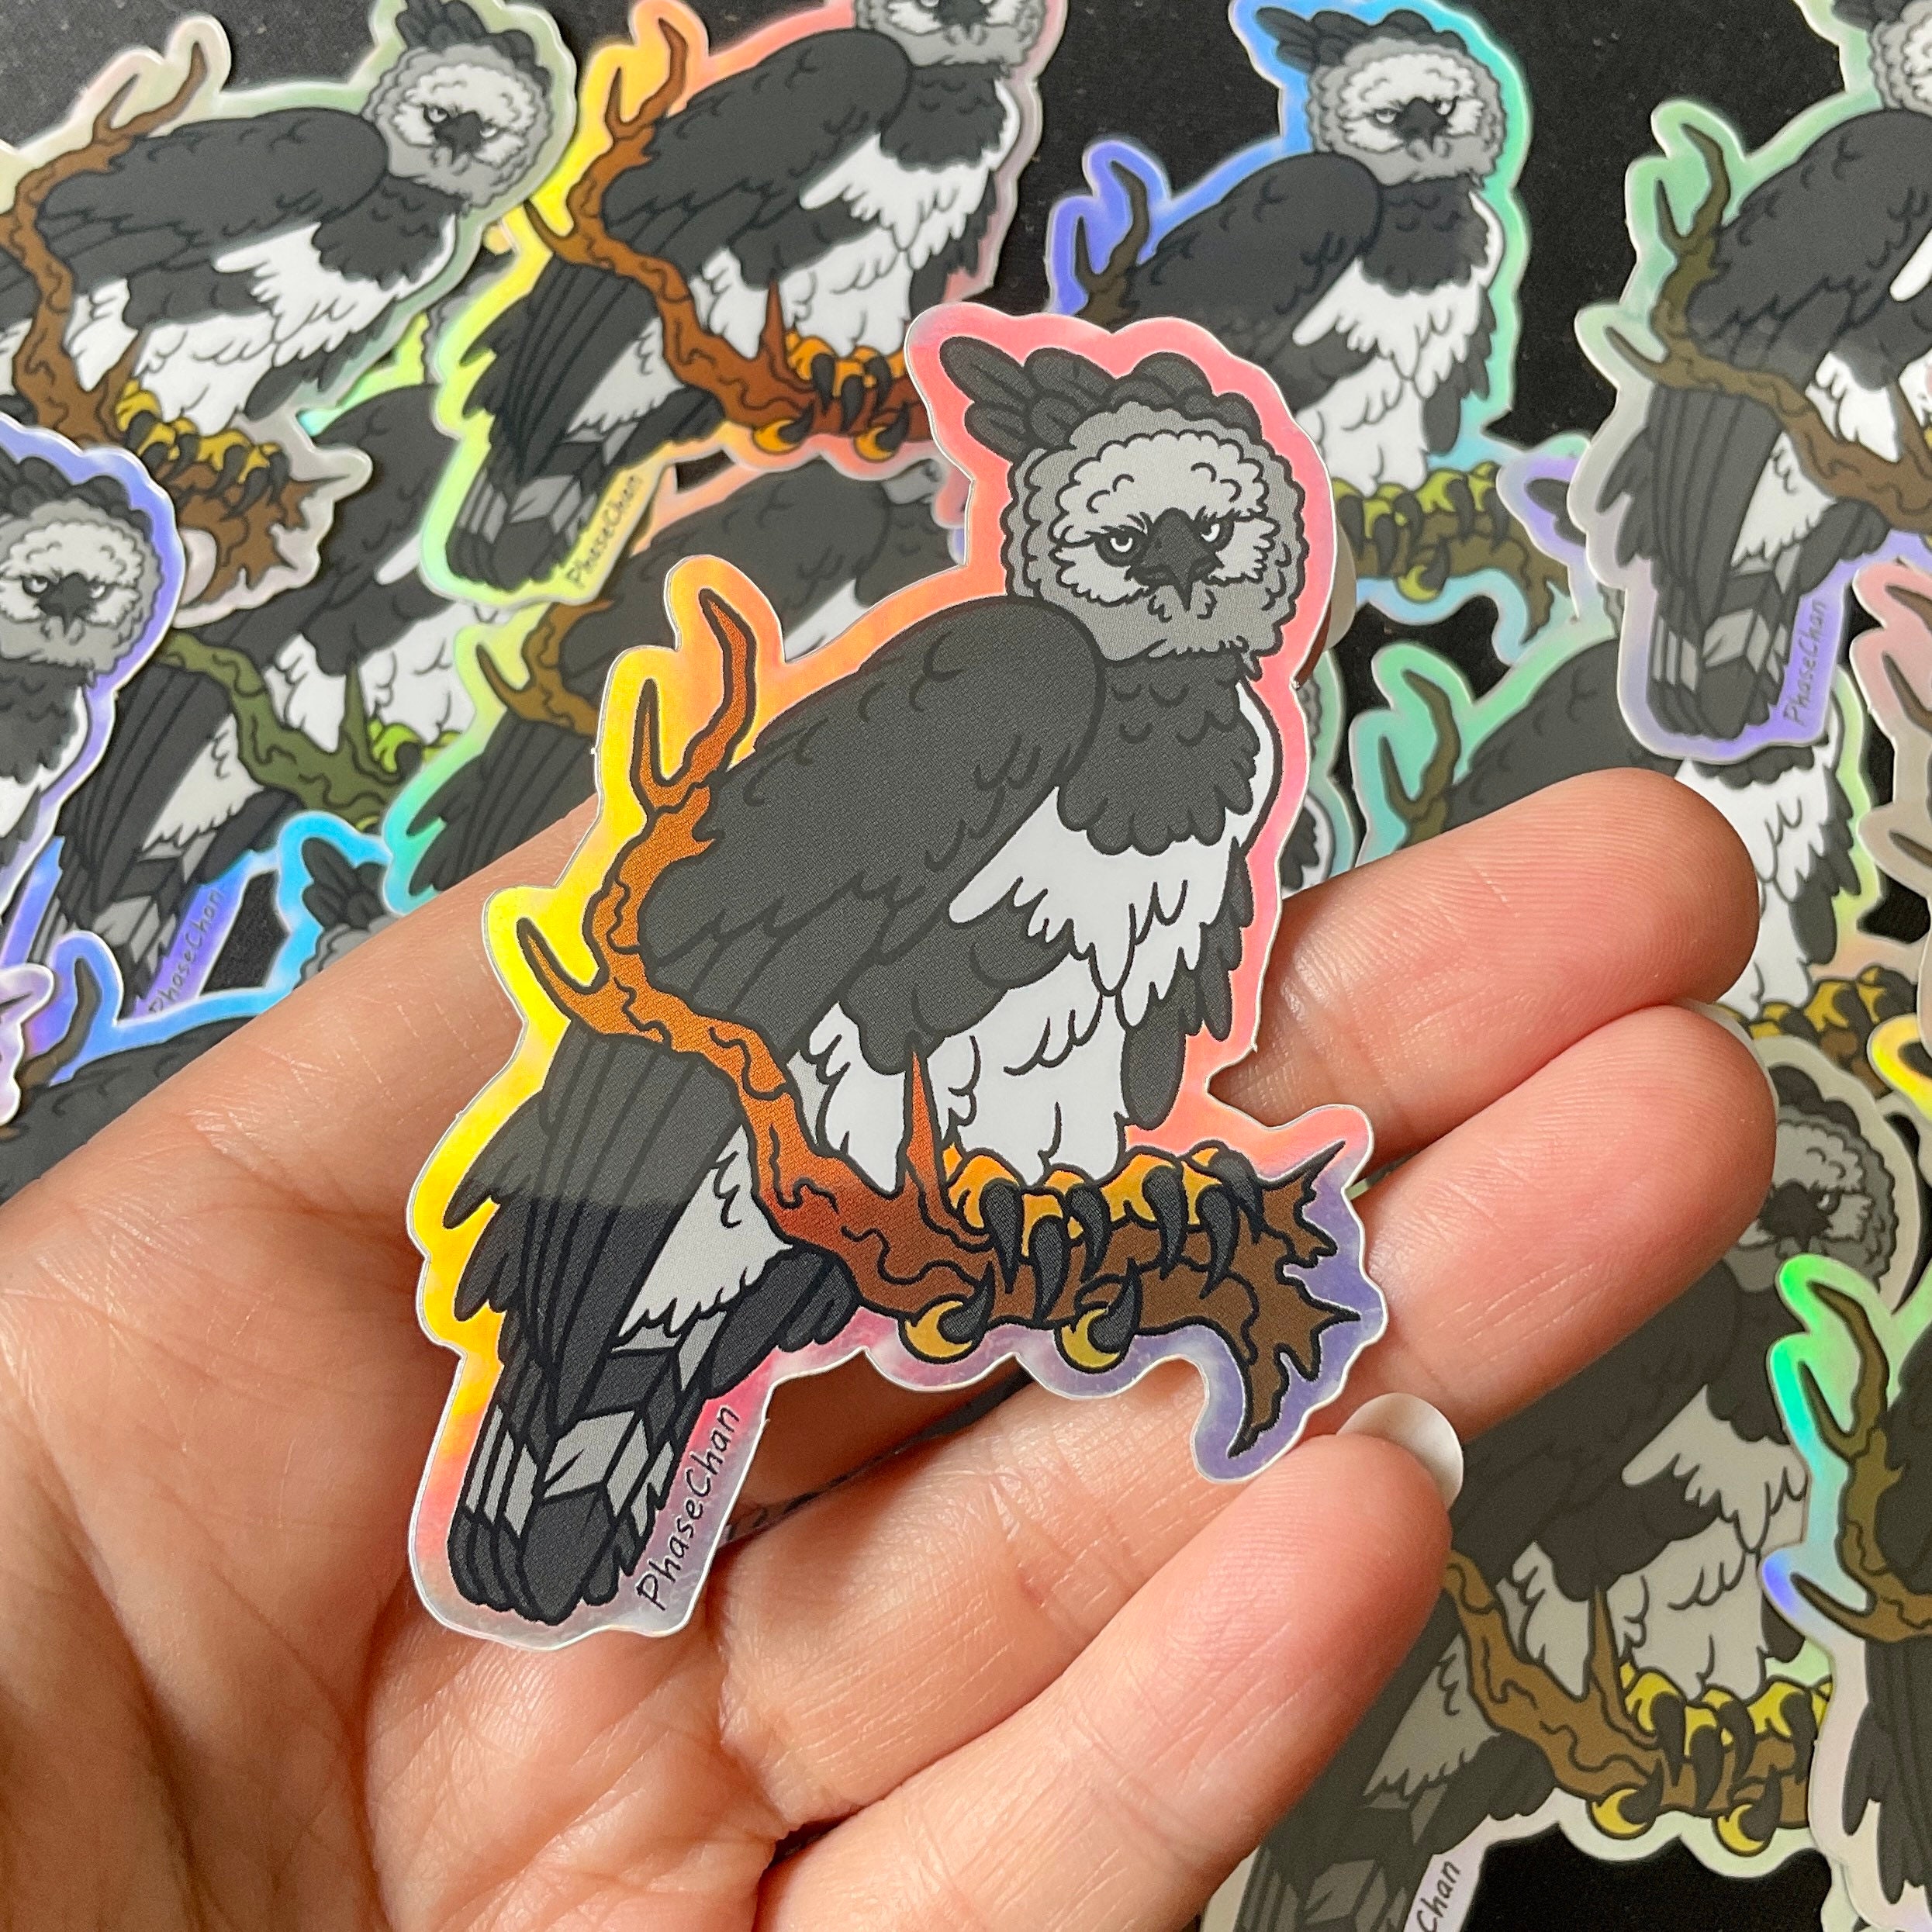 Harpy Eagles Stickers for Sale